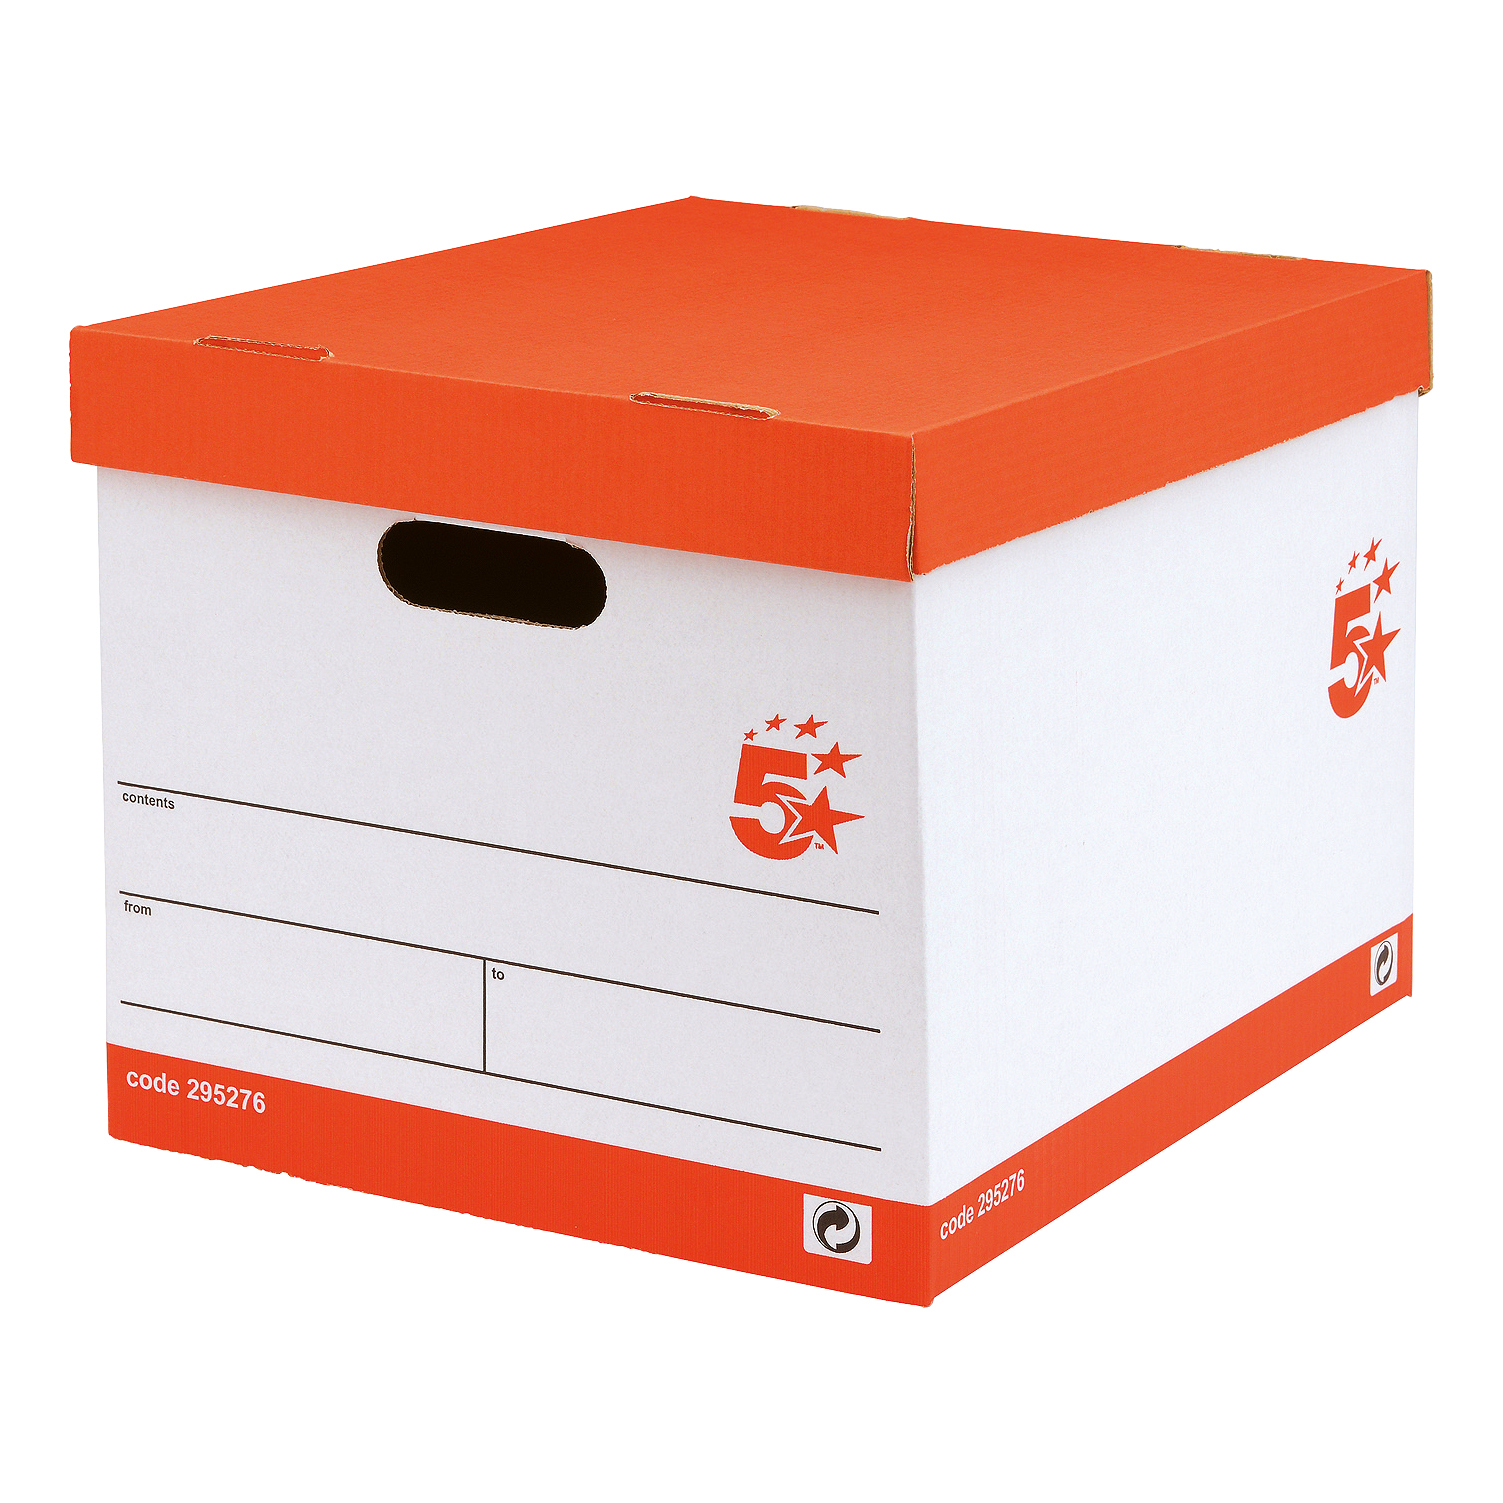 5+Star+Office+FSC+Storage+Box+with+Lid+Self-assembly+W321xD392xH291mm+Red+%26+White+%5BPack+10%5D%40FB-9